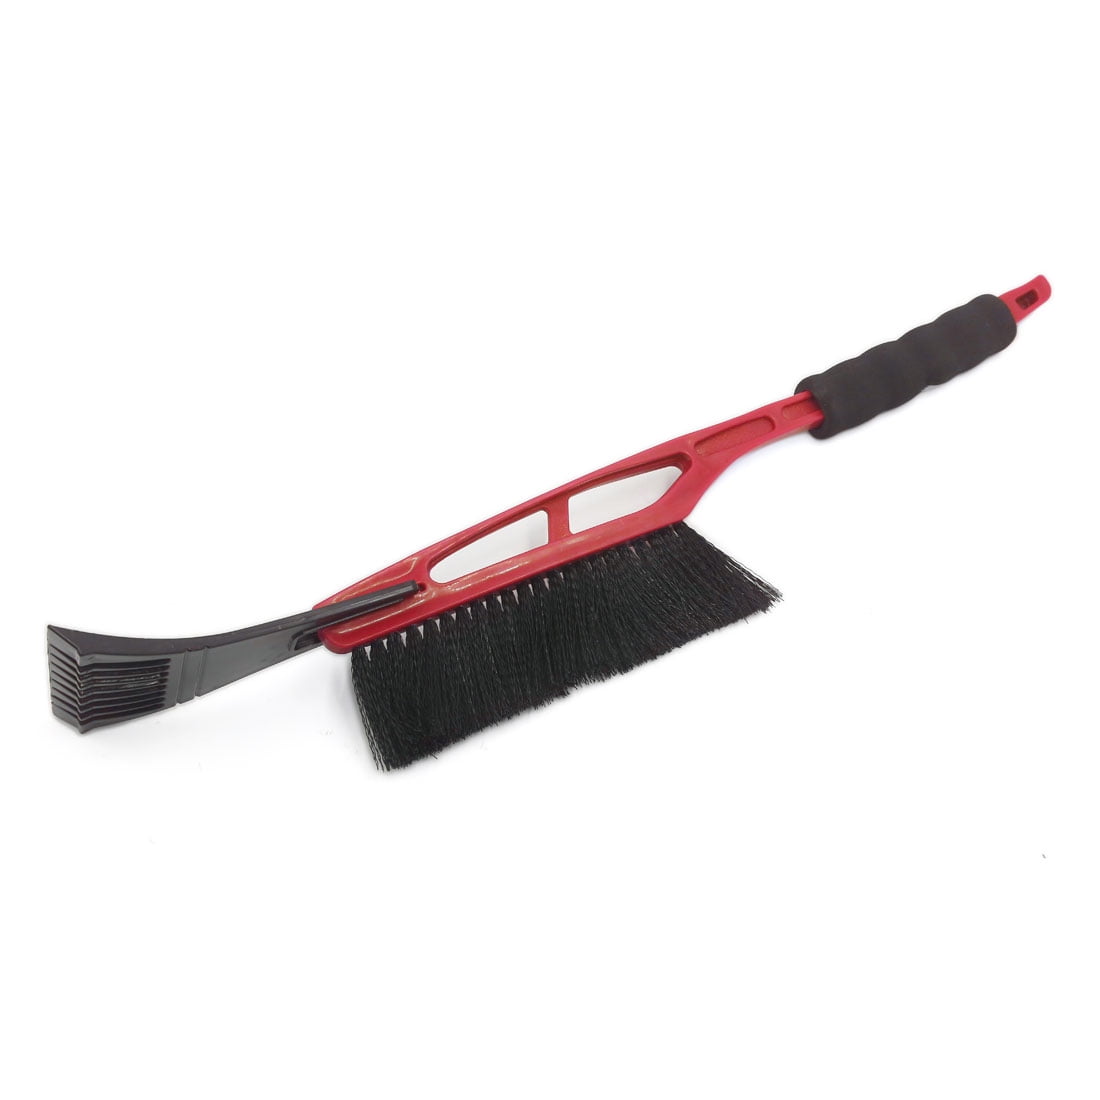 Orange Red MARSPOWER Car Truck Long-Handled Ice Scraper Car Truck Long-handled Ice Scraper Snow Brush Shovel Auto Vehicle Car Ice Snow Remover Clean Tools Car Yellow 